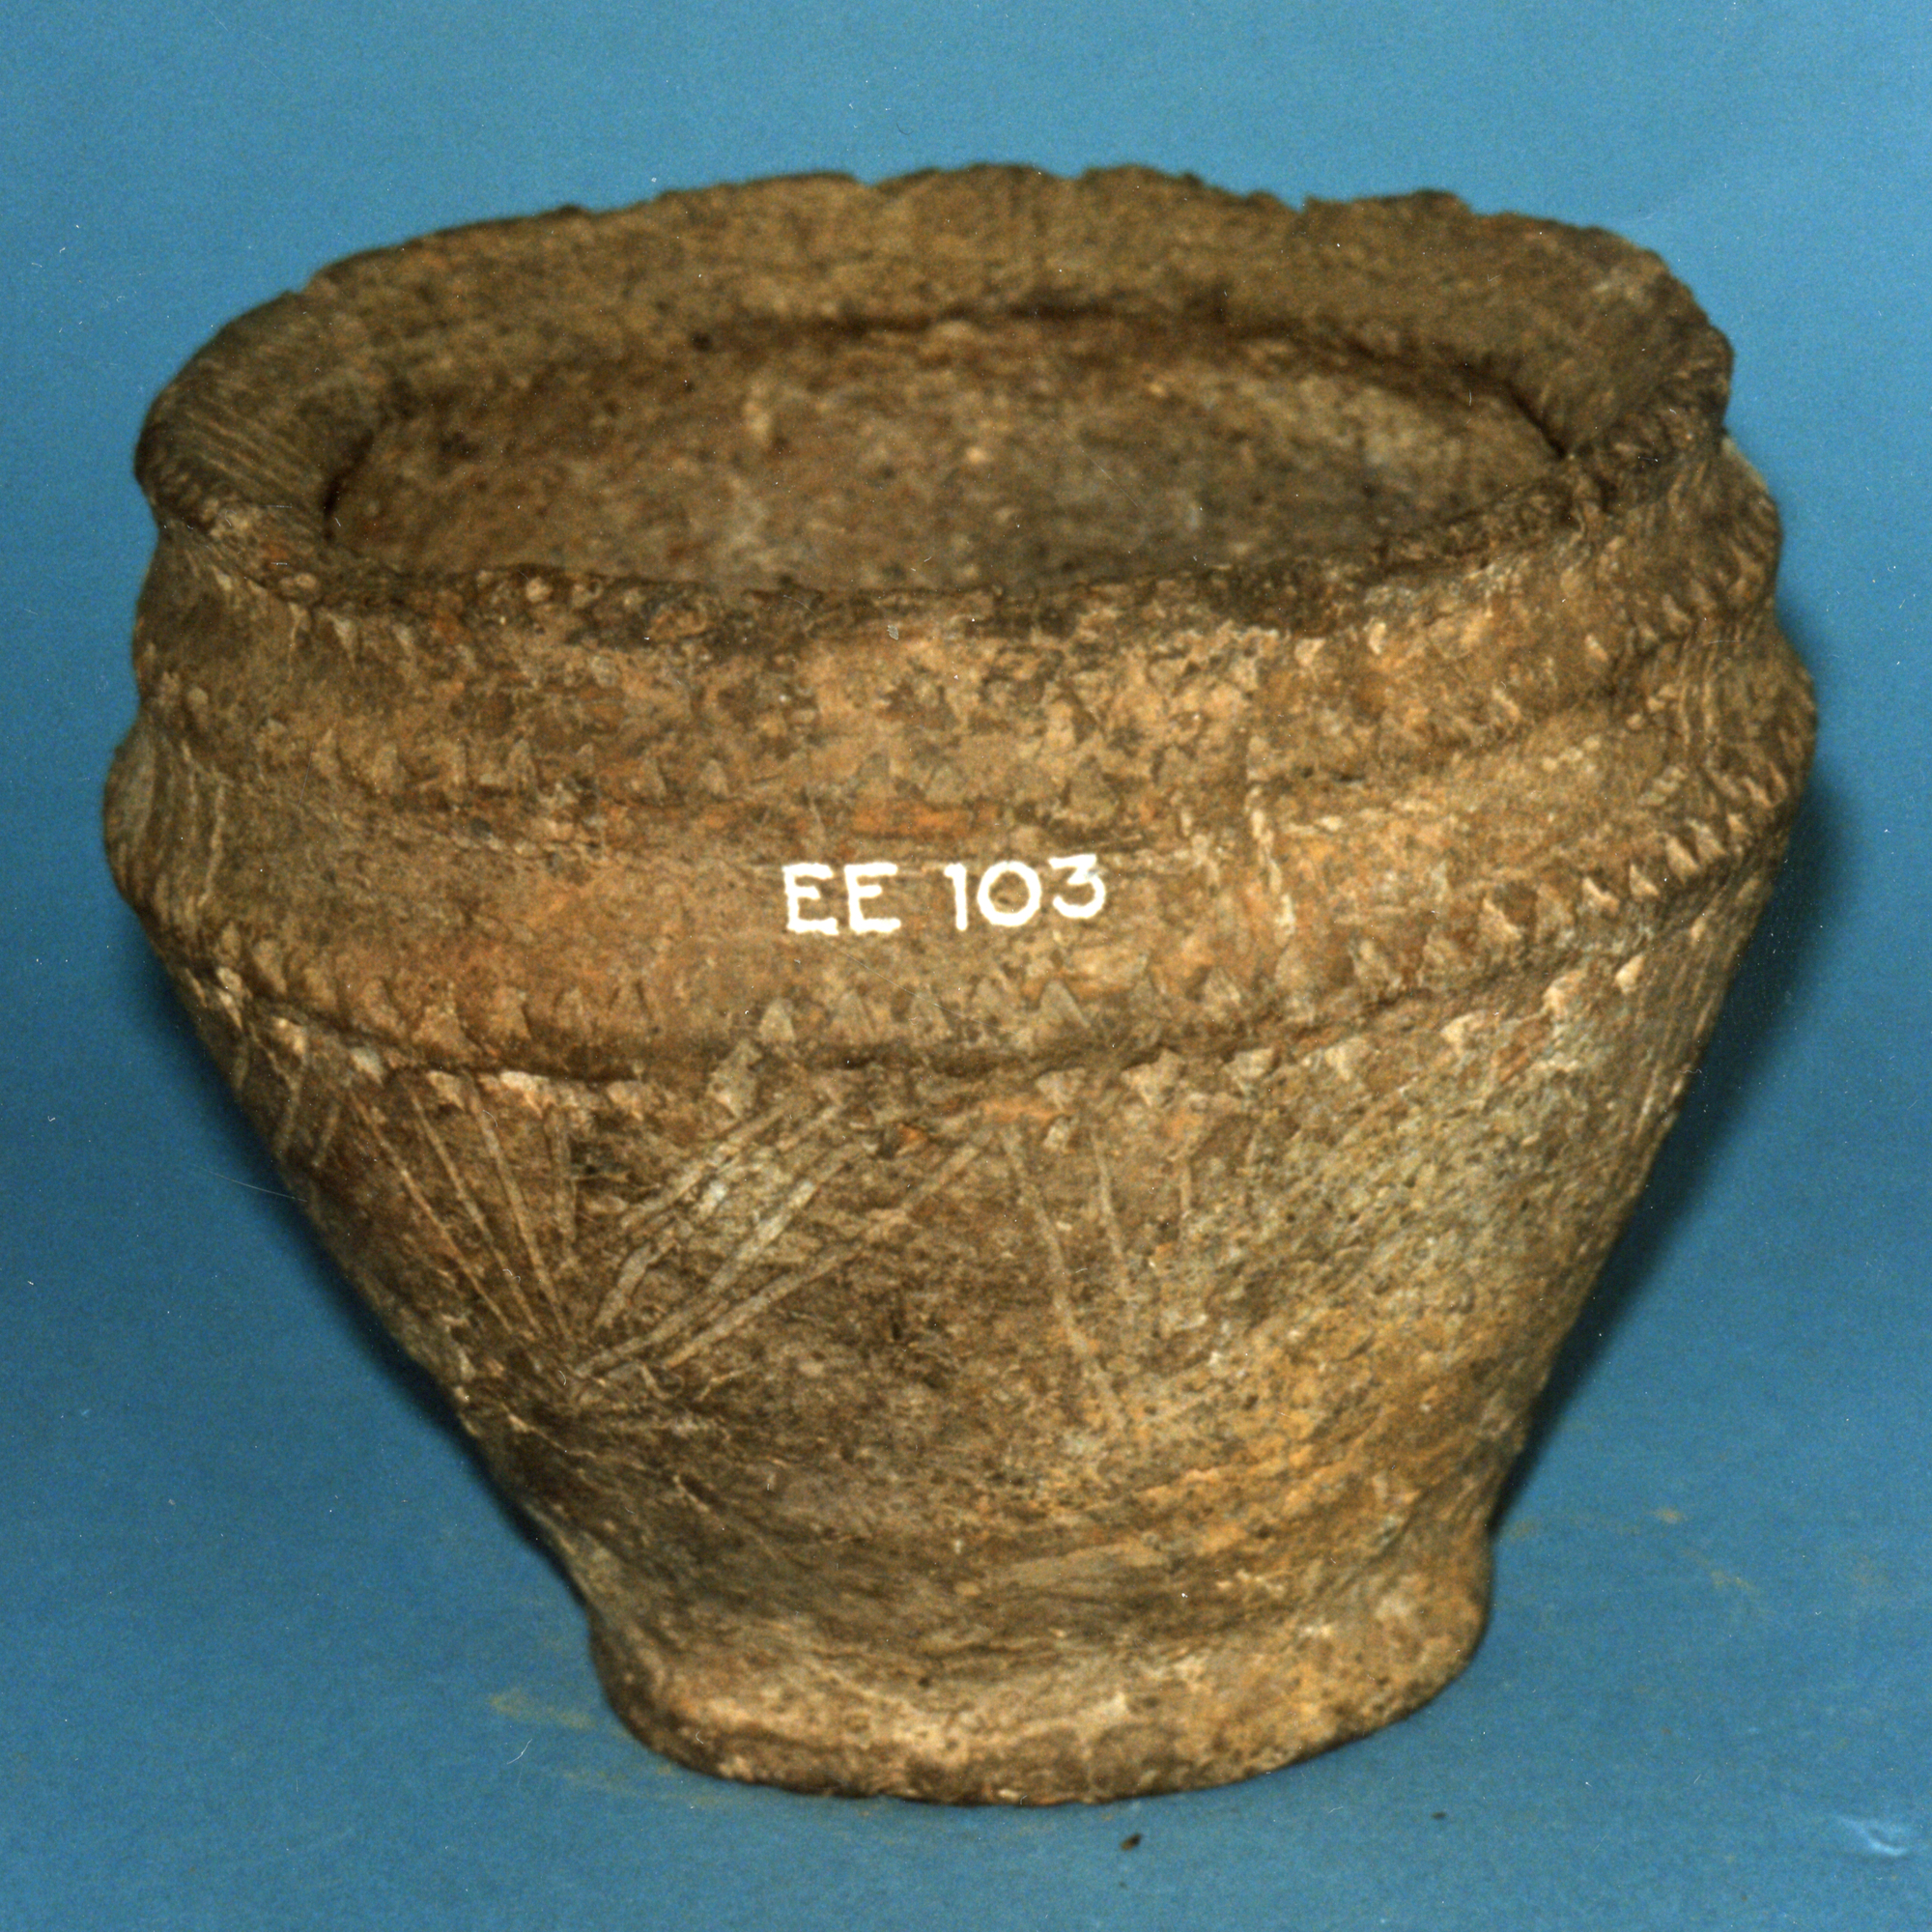 Image of Pottery food vessel from a cist near Crieff © National Museums Scotland